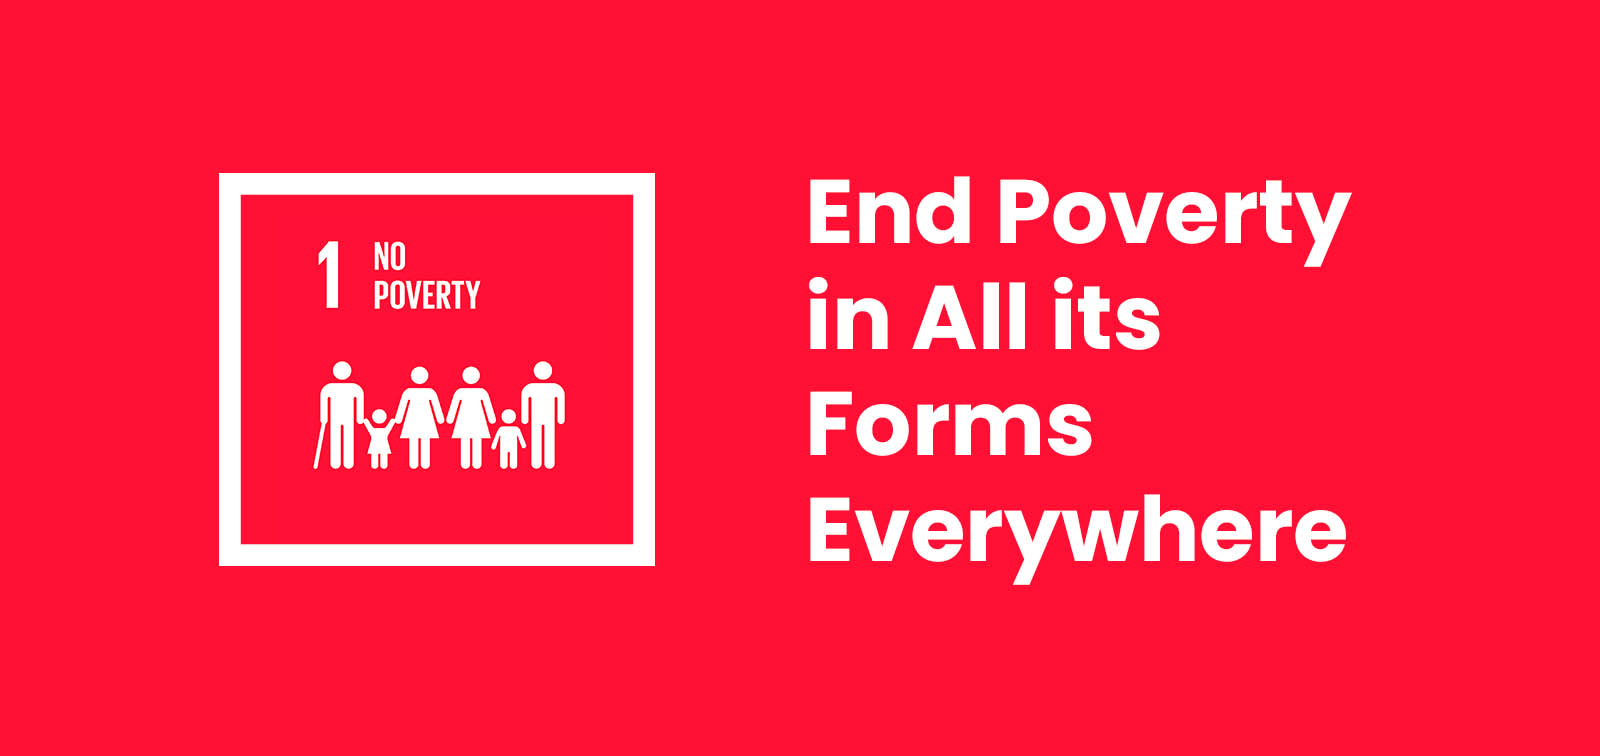 Goal 1: End Poverty in All its Forms Everywhere - Project - ISGLOBAL